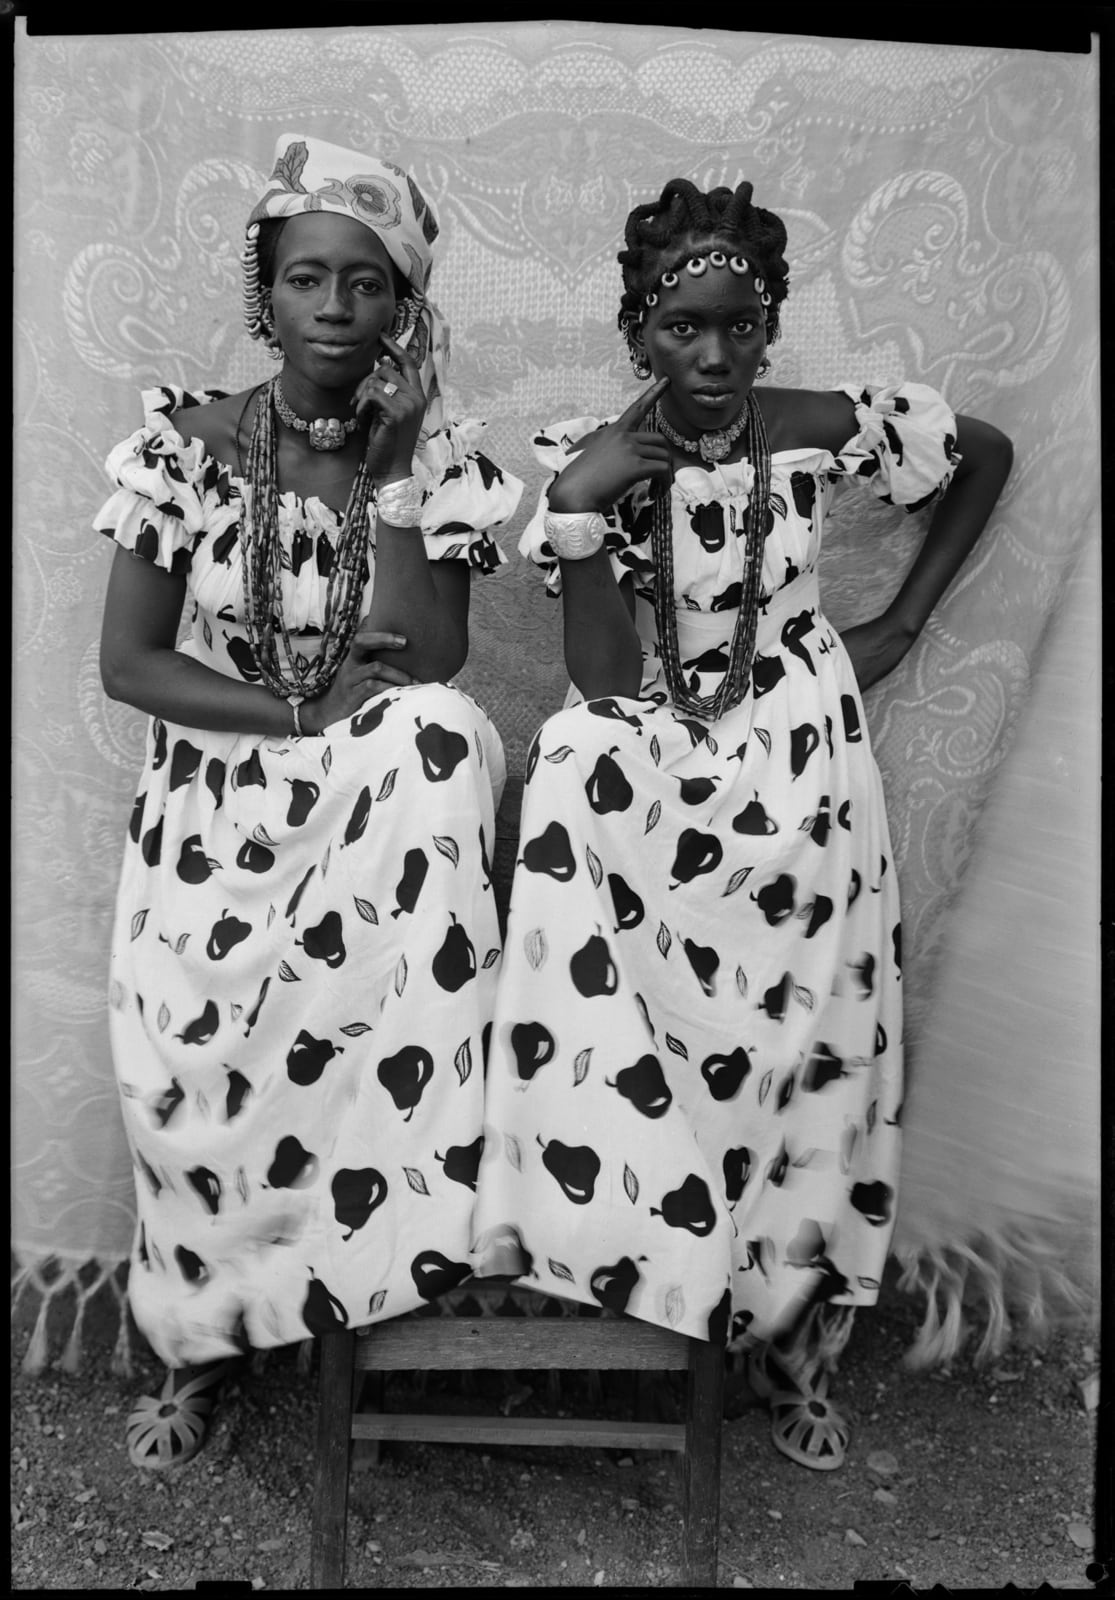 Seydou Keïta Sans titre/ Untitled (03859), 1948-1954 Posthumous Gelatin black and white silver print on cartoline paper 280g 60 x 50 cm (23 5/8 x 19 5/8 in.) Edition of 10 + 2 AP Posthumous Gelatin black and white silver print on cartoline paper 280g back-mounted on Aluminium 1mm 162 x 122 cm (63 25/32 x 48 1/32 in) Edition of 5 + 2 AP